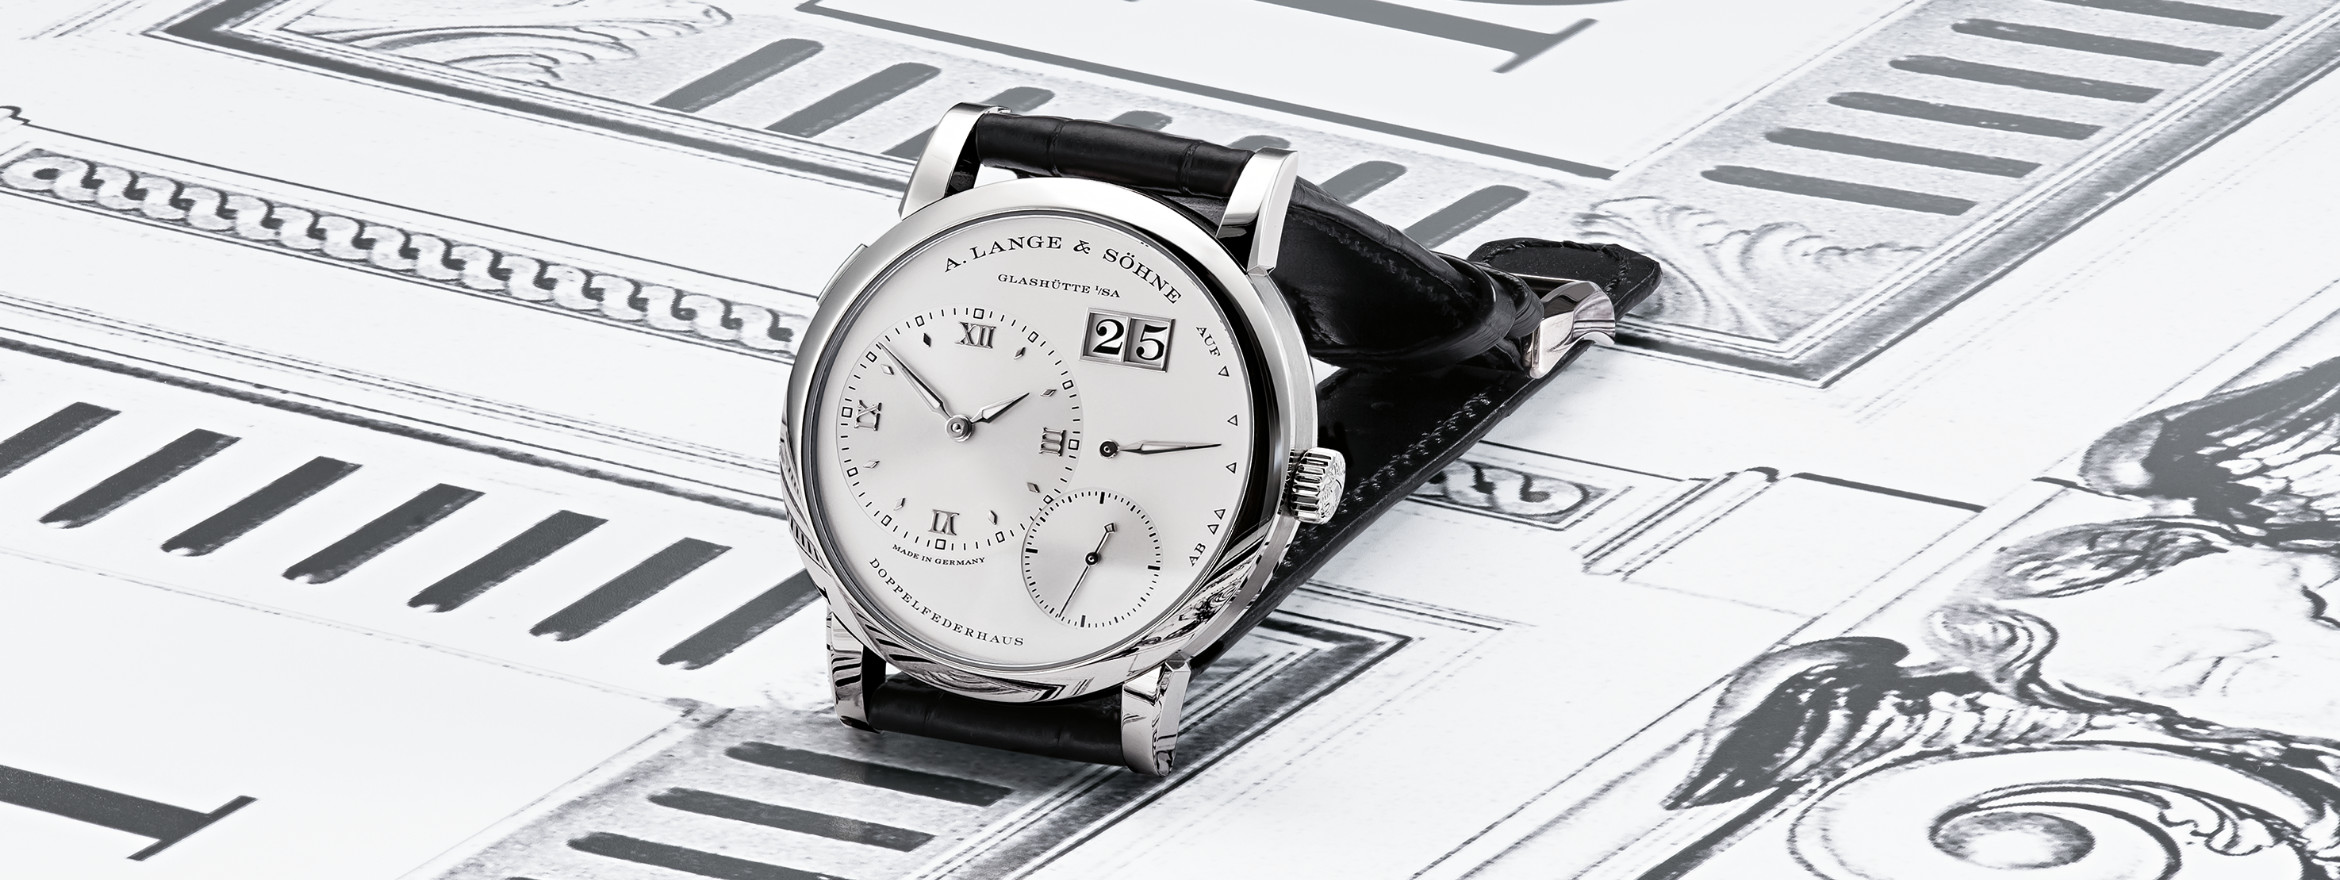 Alluring Alloy: German Silver in Watchmaking